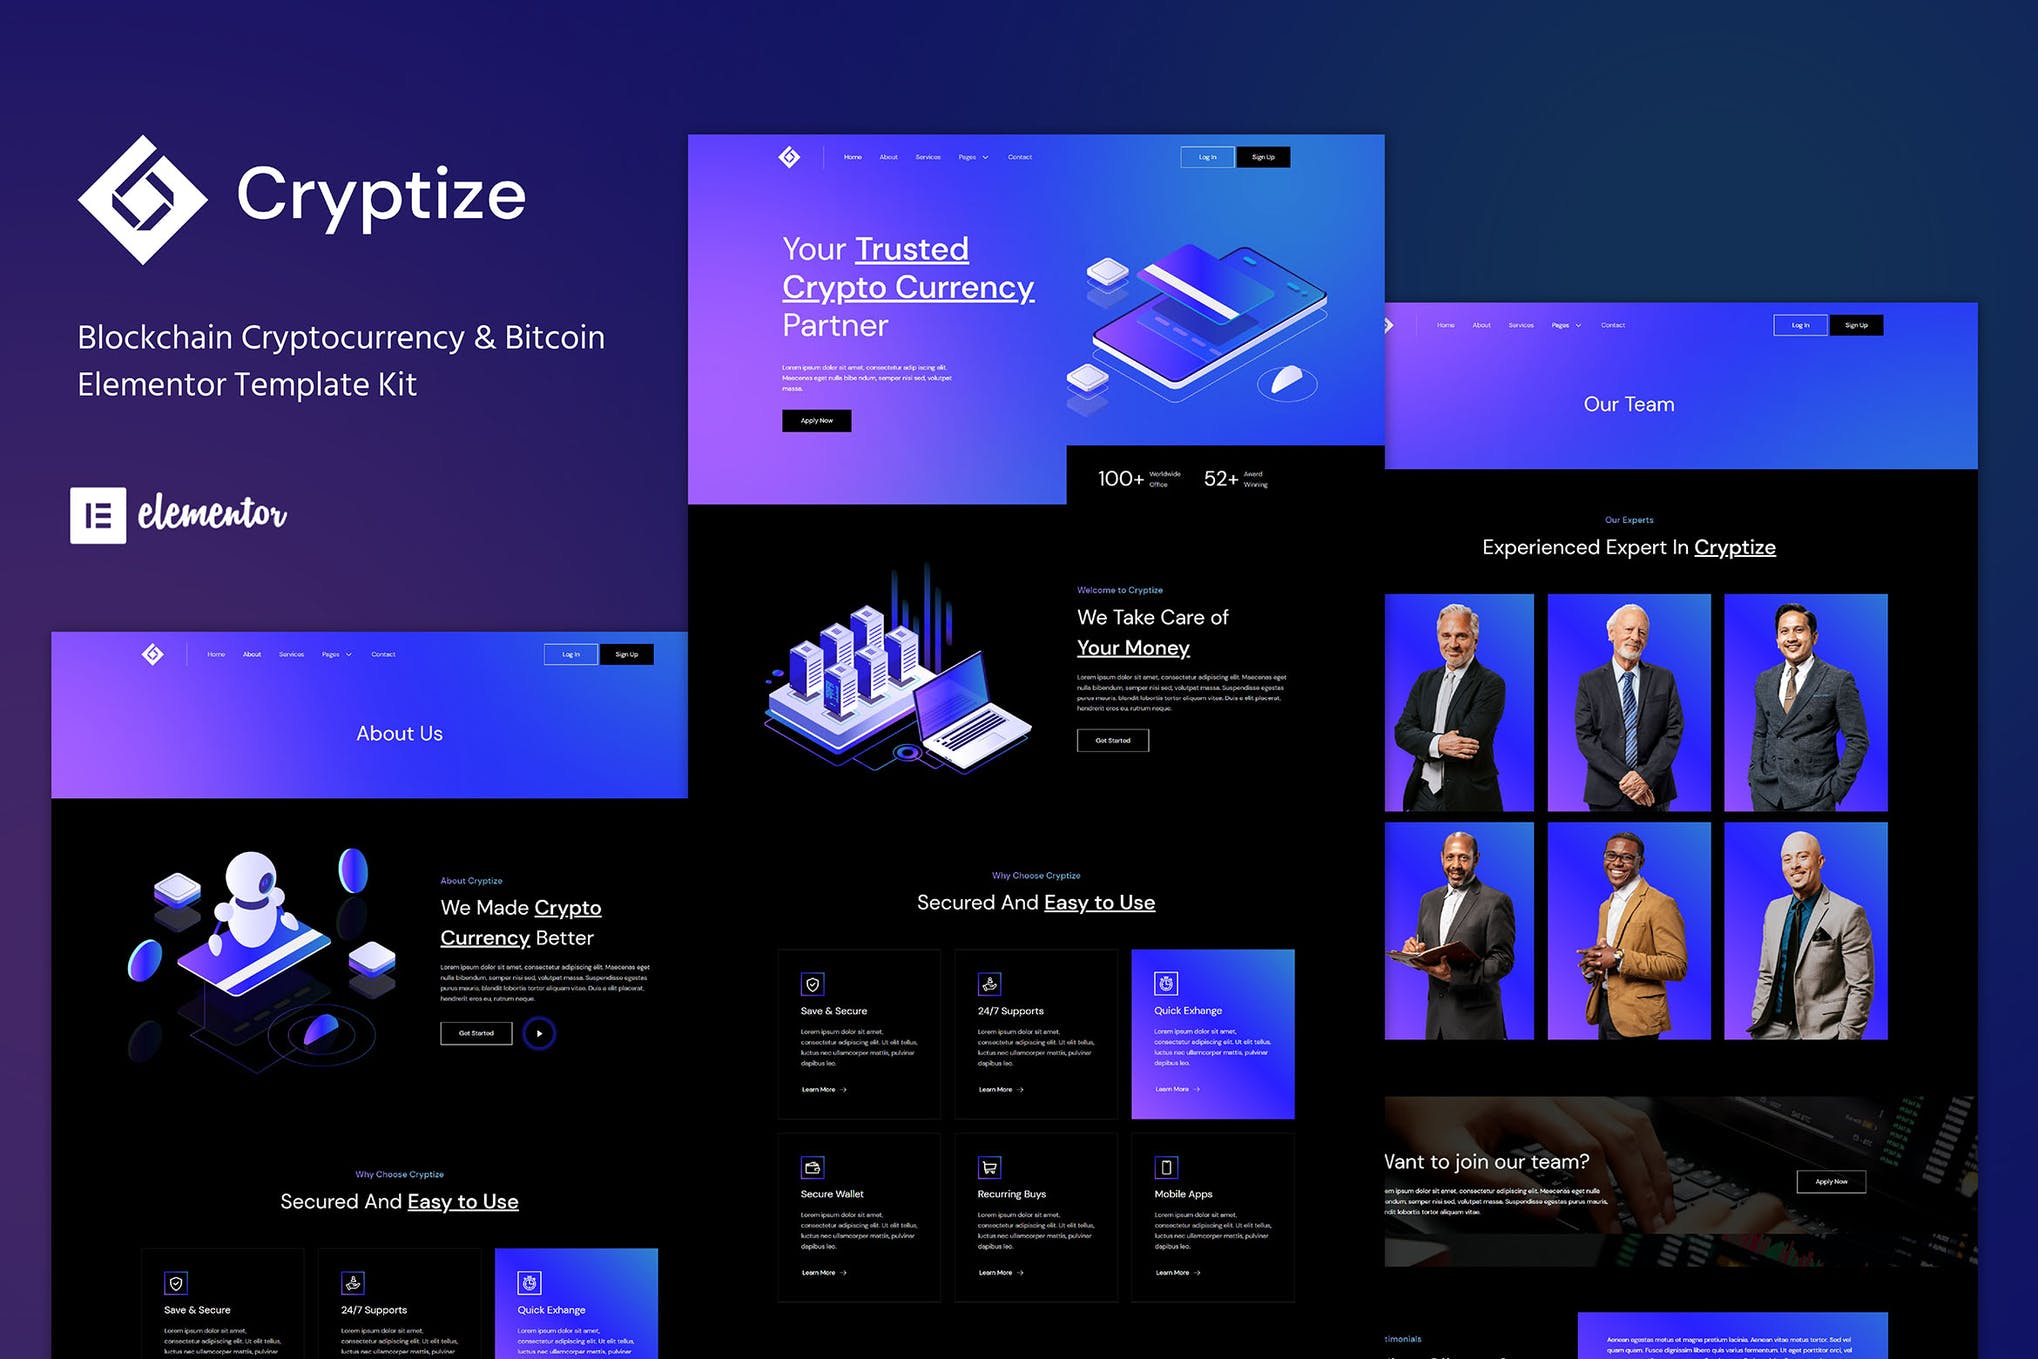 Cryptize - Blockchain Cryptocurrency - Bitcoin Elementor Template Kit